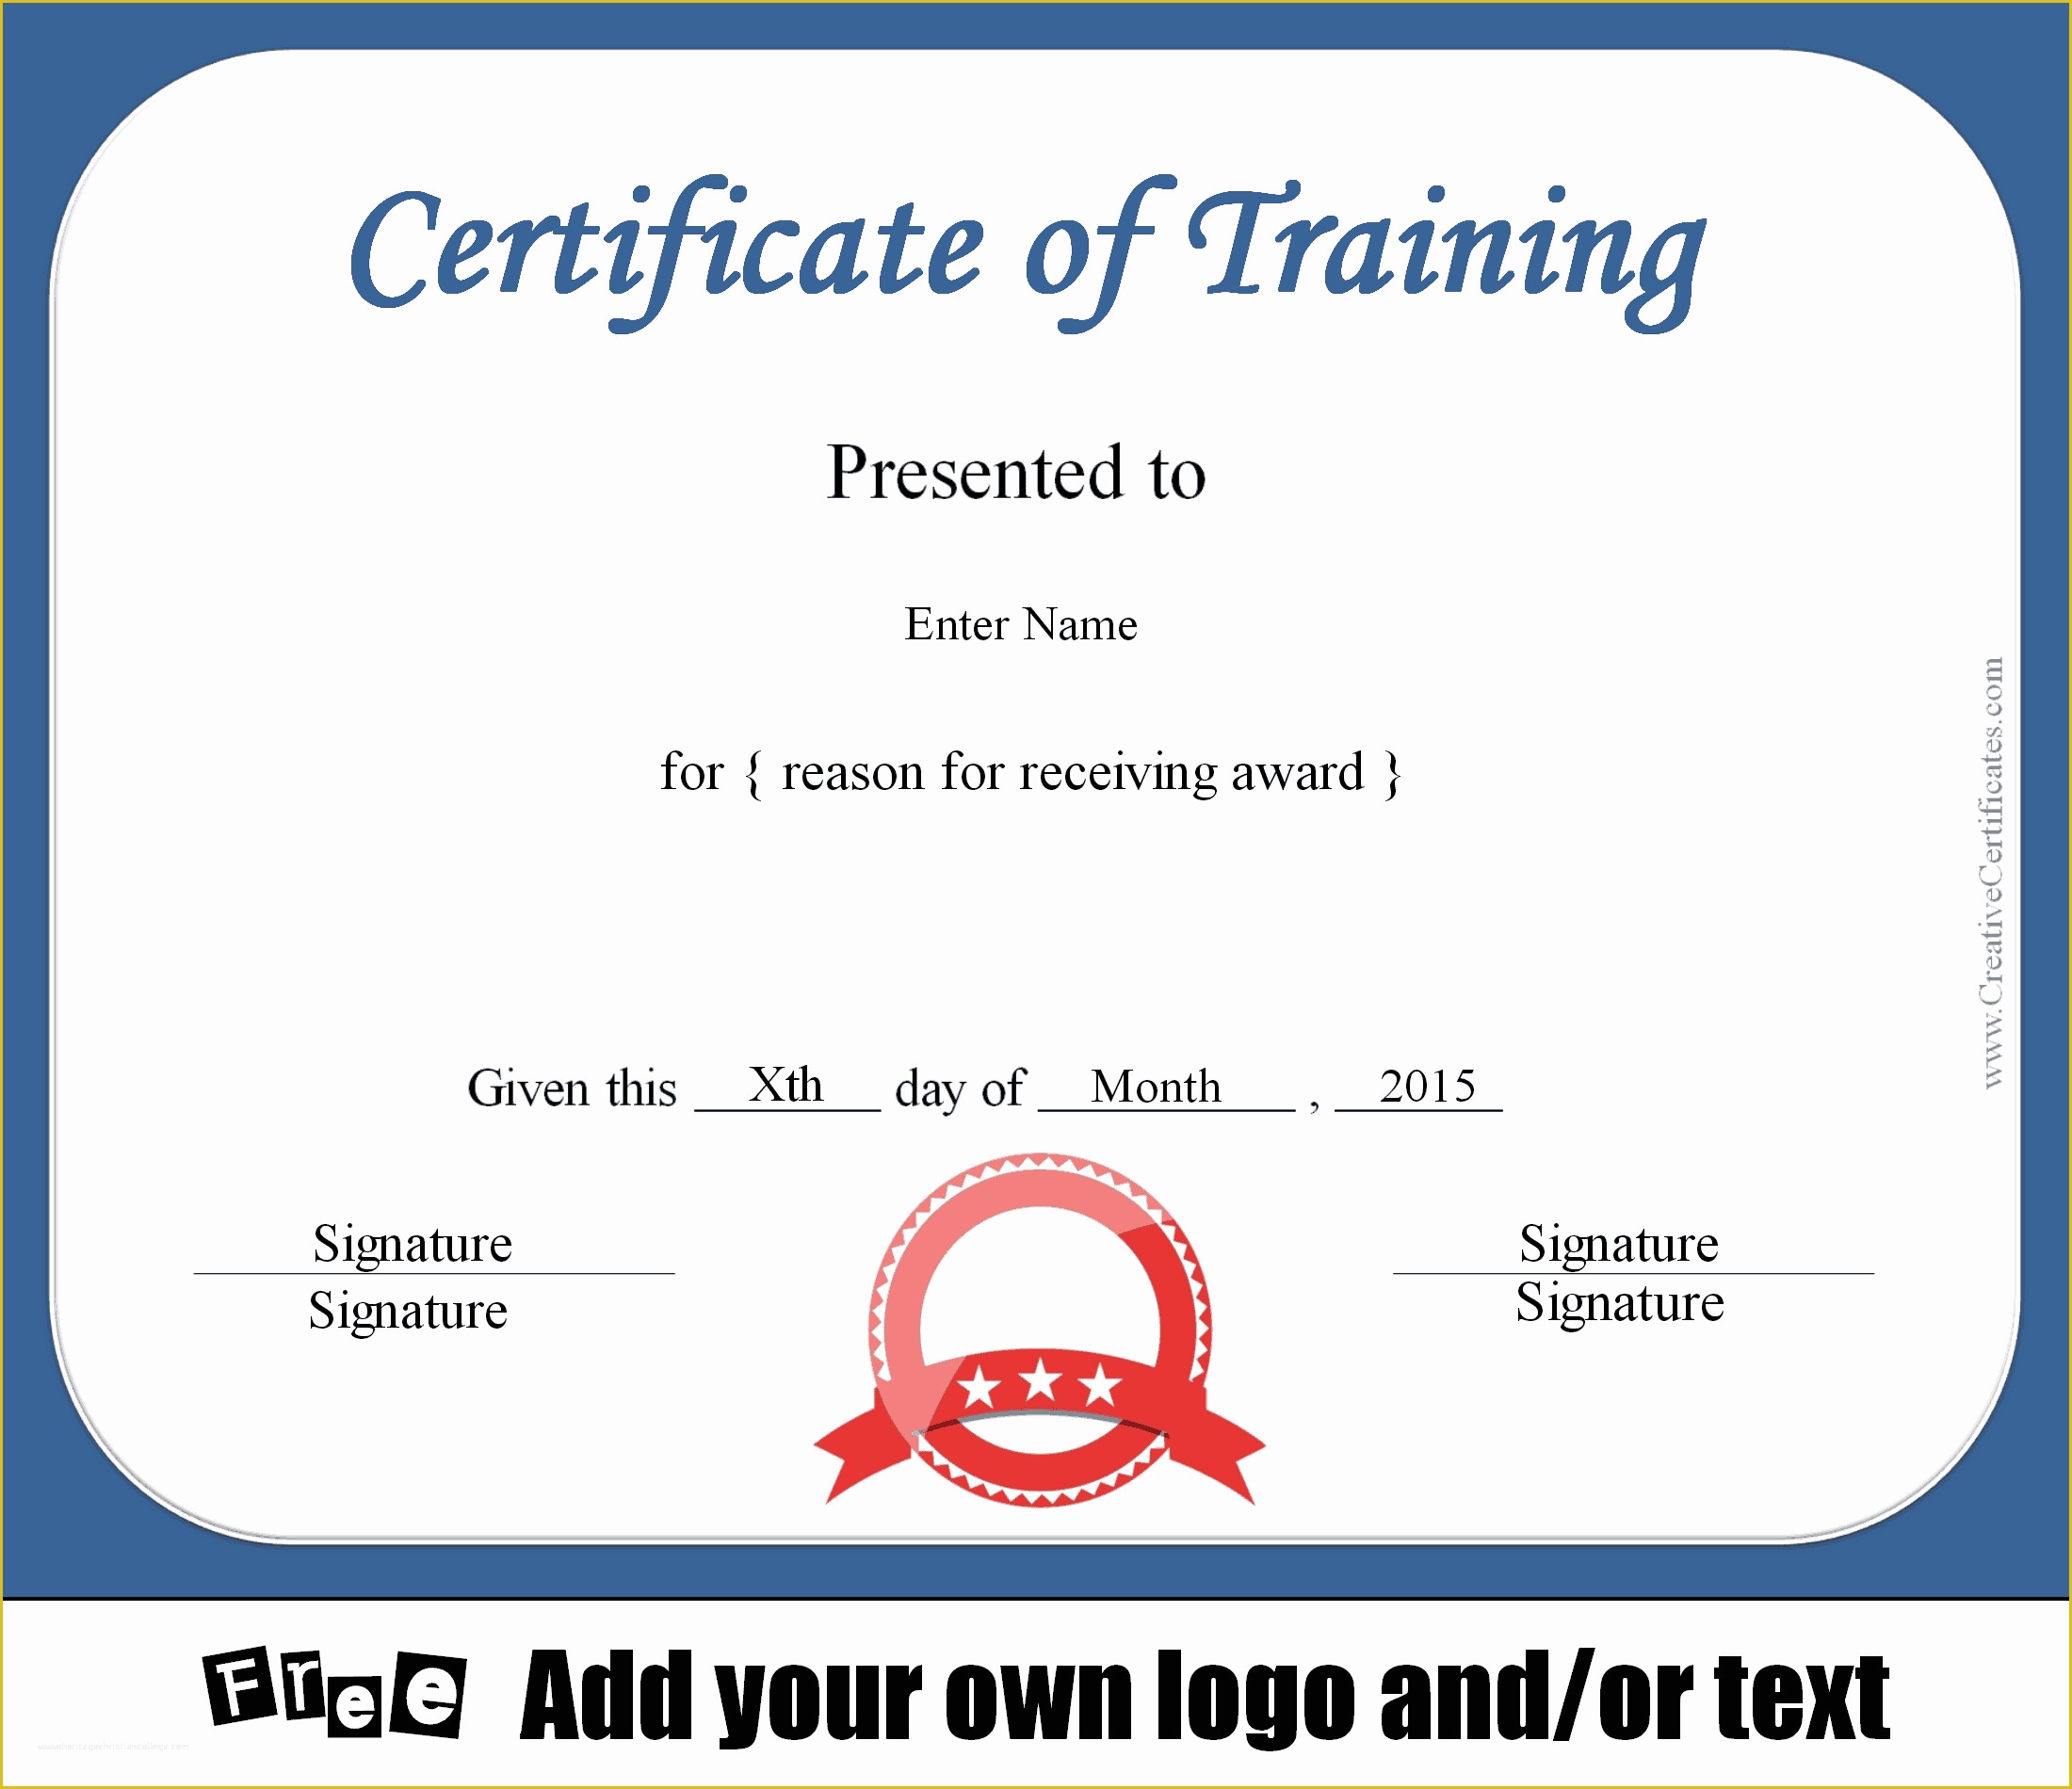 Training Certificate Template Free Of Free Certificate Of Training Template Customizable